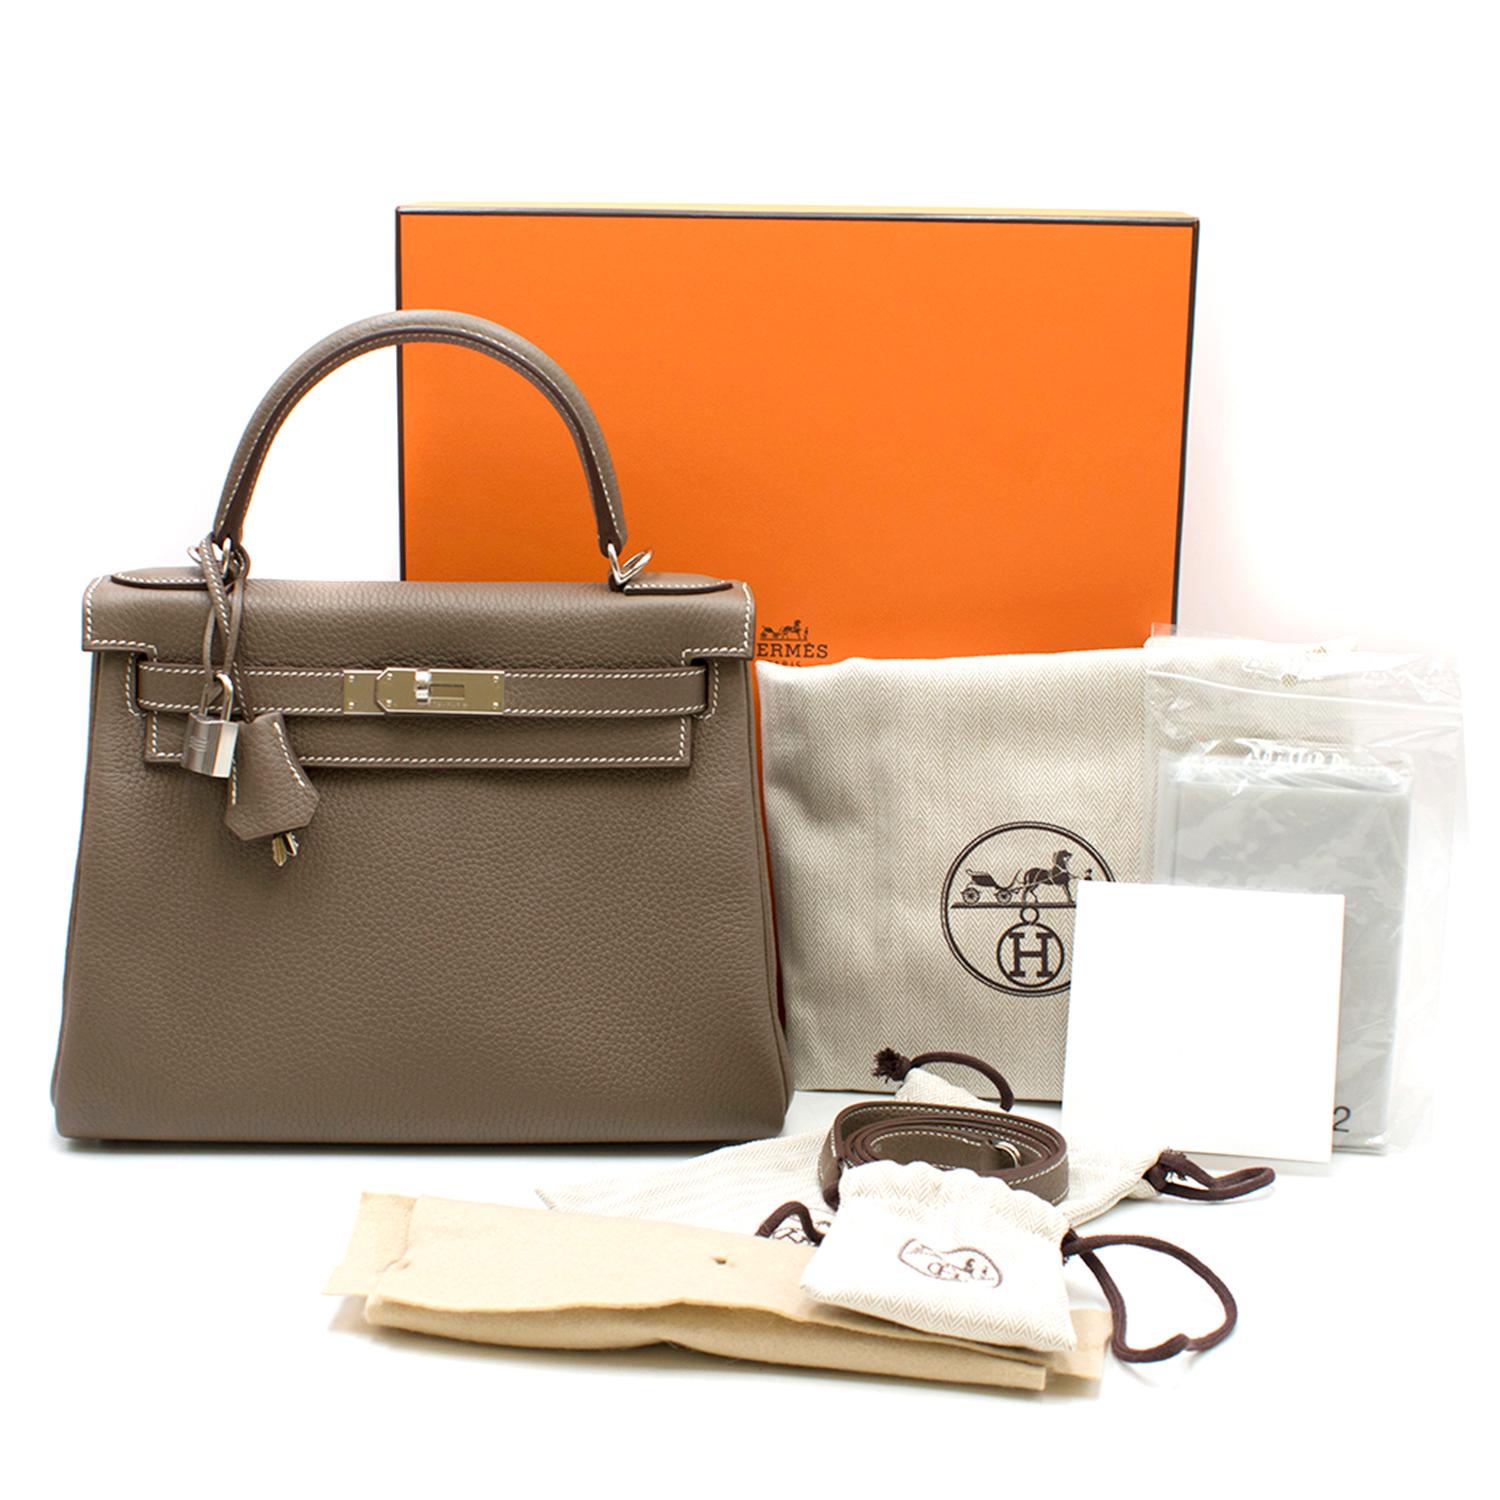 Hermes Clemence Leather Etoupe 28cm Kelly Bag

- Circa: 2018
- Taupe clemence leather
- Twist-lock closure on front flap
- One rolled leather handle
- Inside zip compartment
- Inside pouch compartments
- Silver palladium hardware
- Contrast